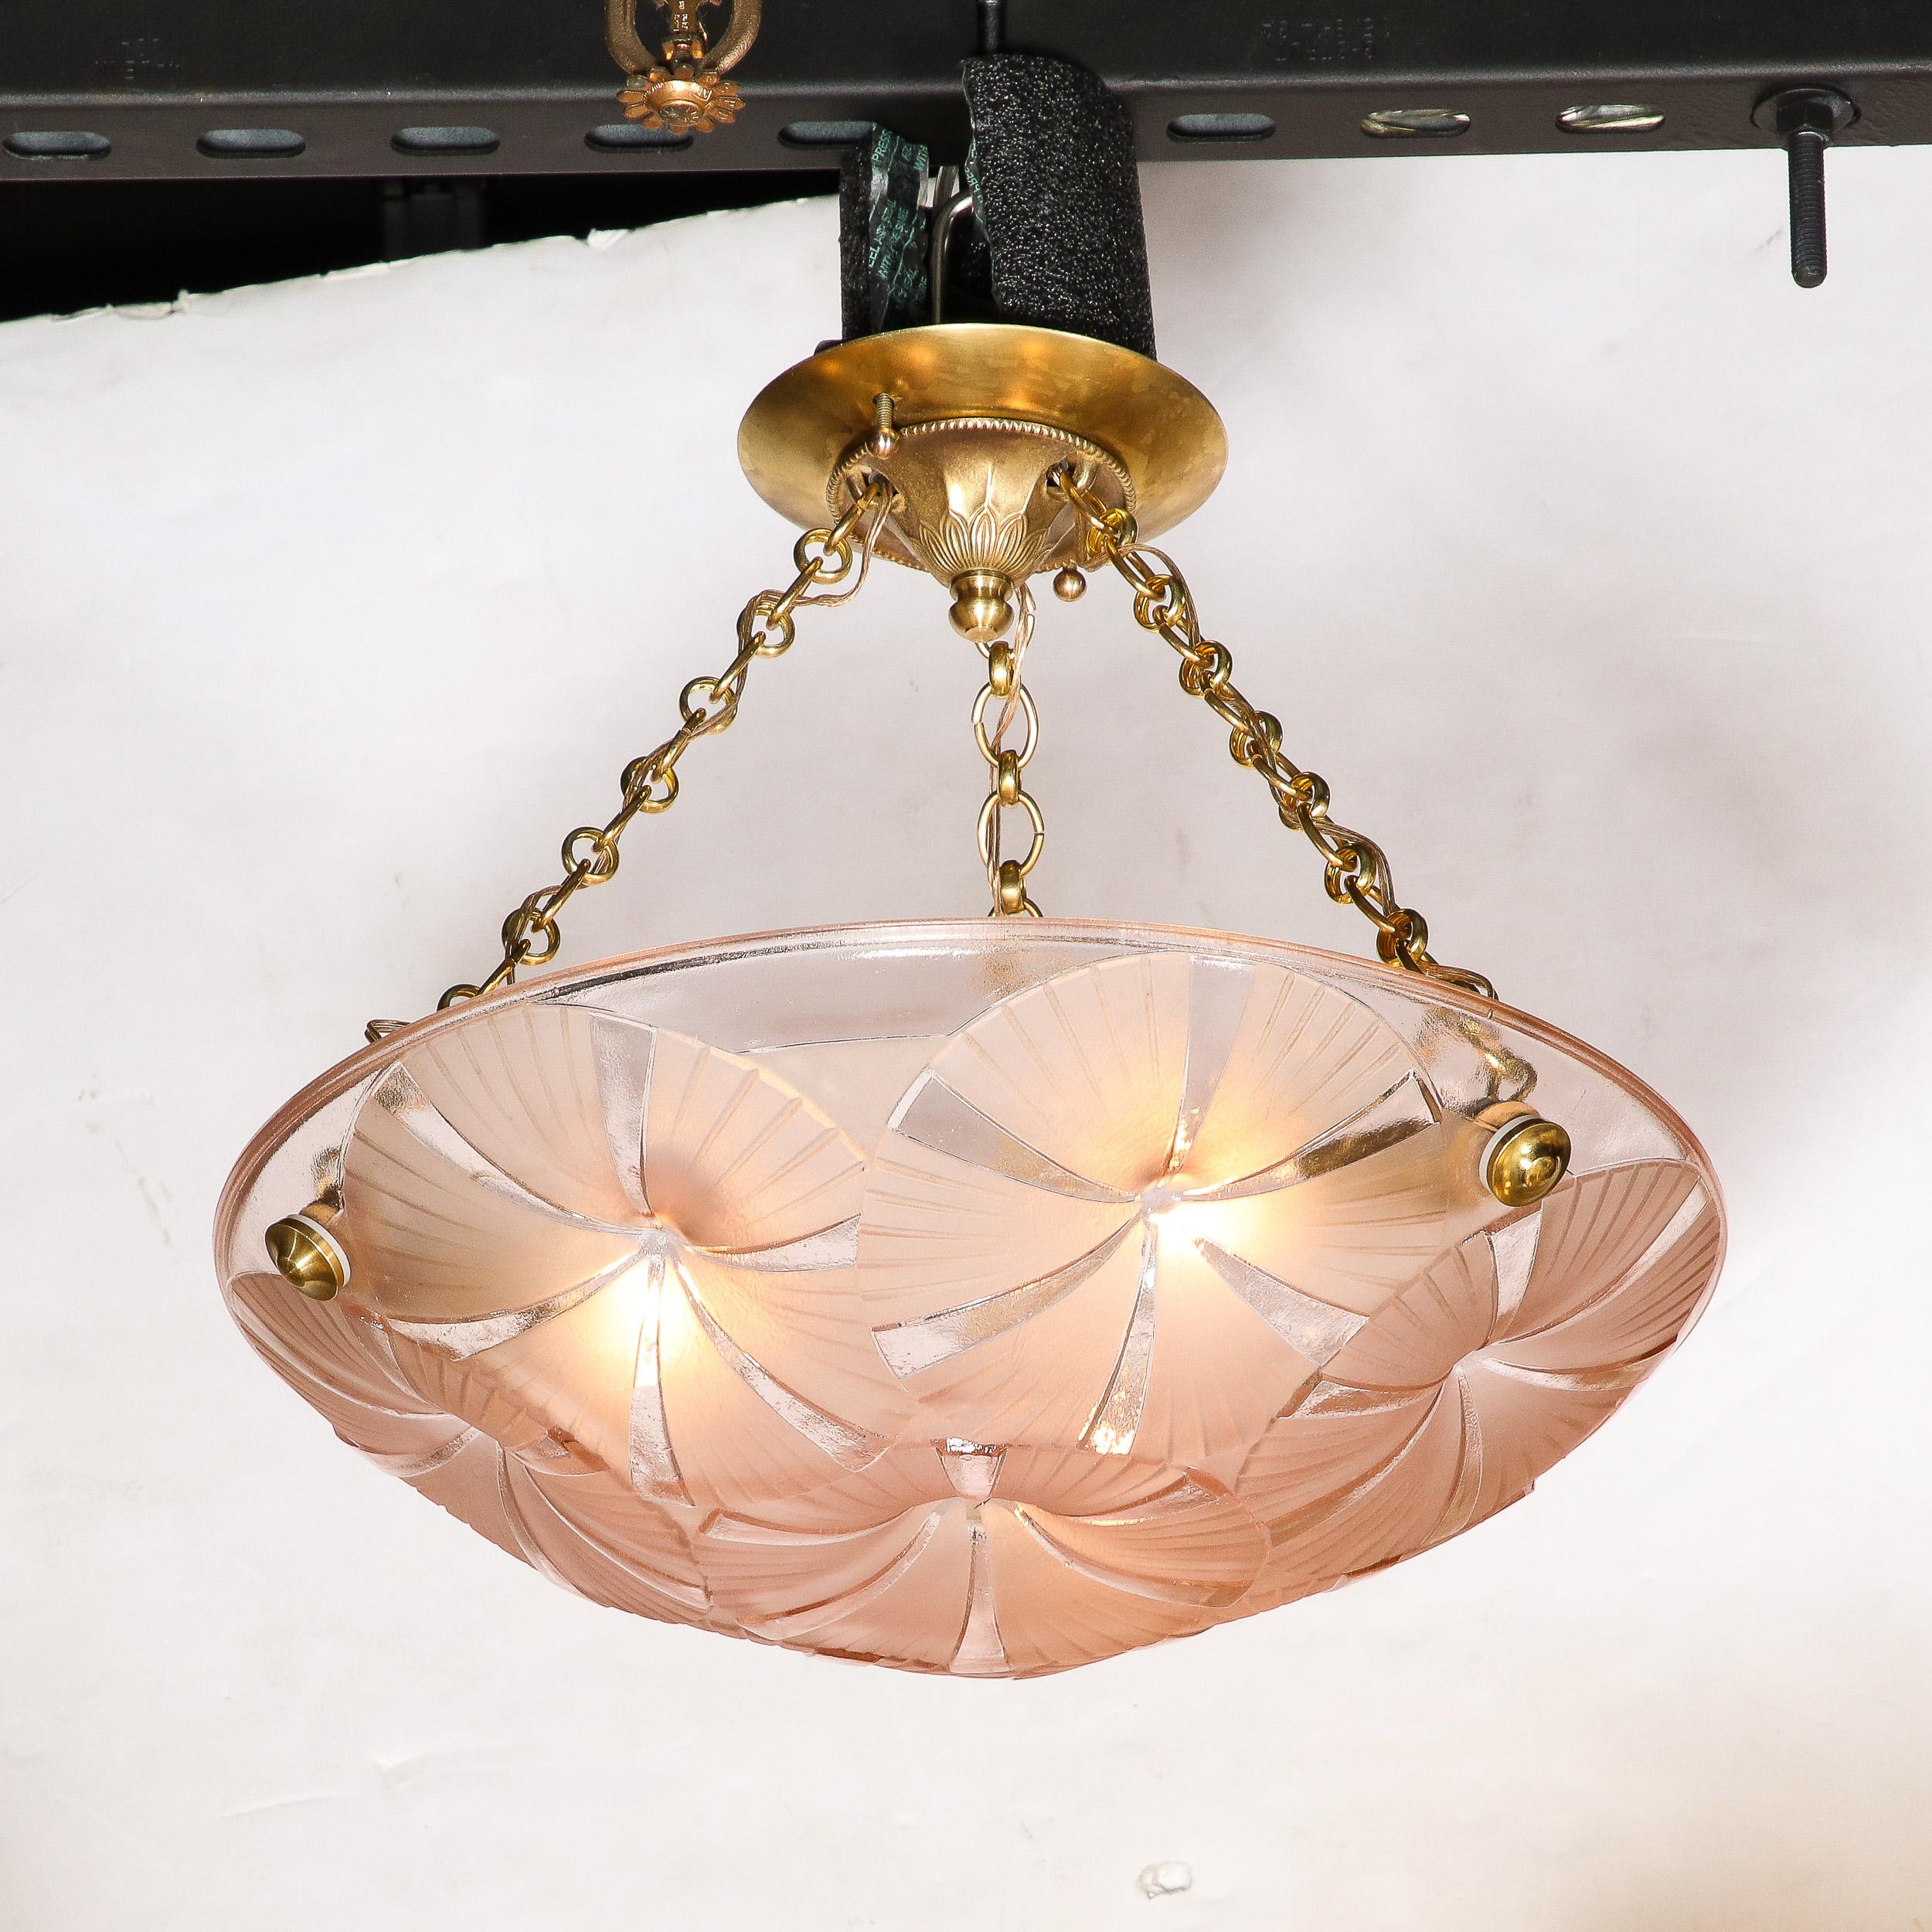 This alluring and materially exquisite Art Deco Pendant Chandelier in Molded & Frosted Rose Glass is signed Degue and originates from France, Circa 1930. Features a single rose hued molded glass shade with abstracted circular geometric motifs